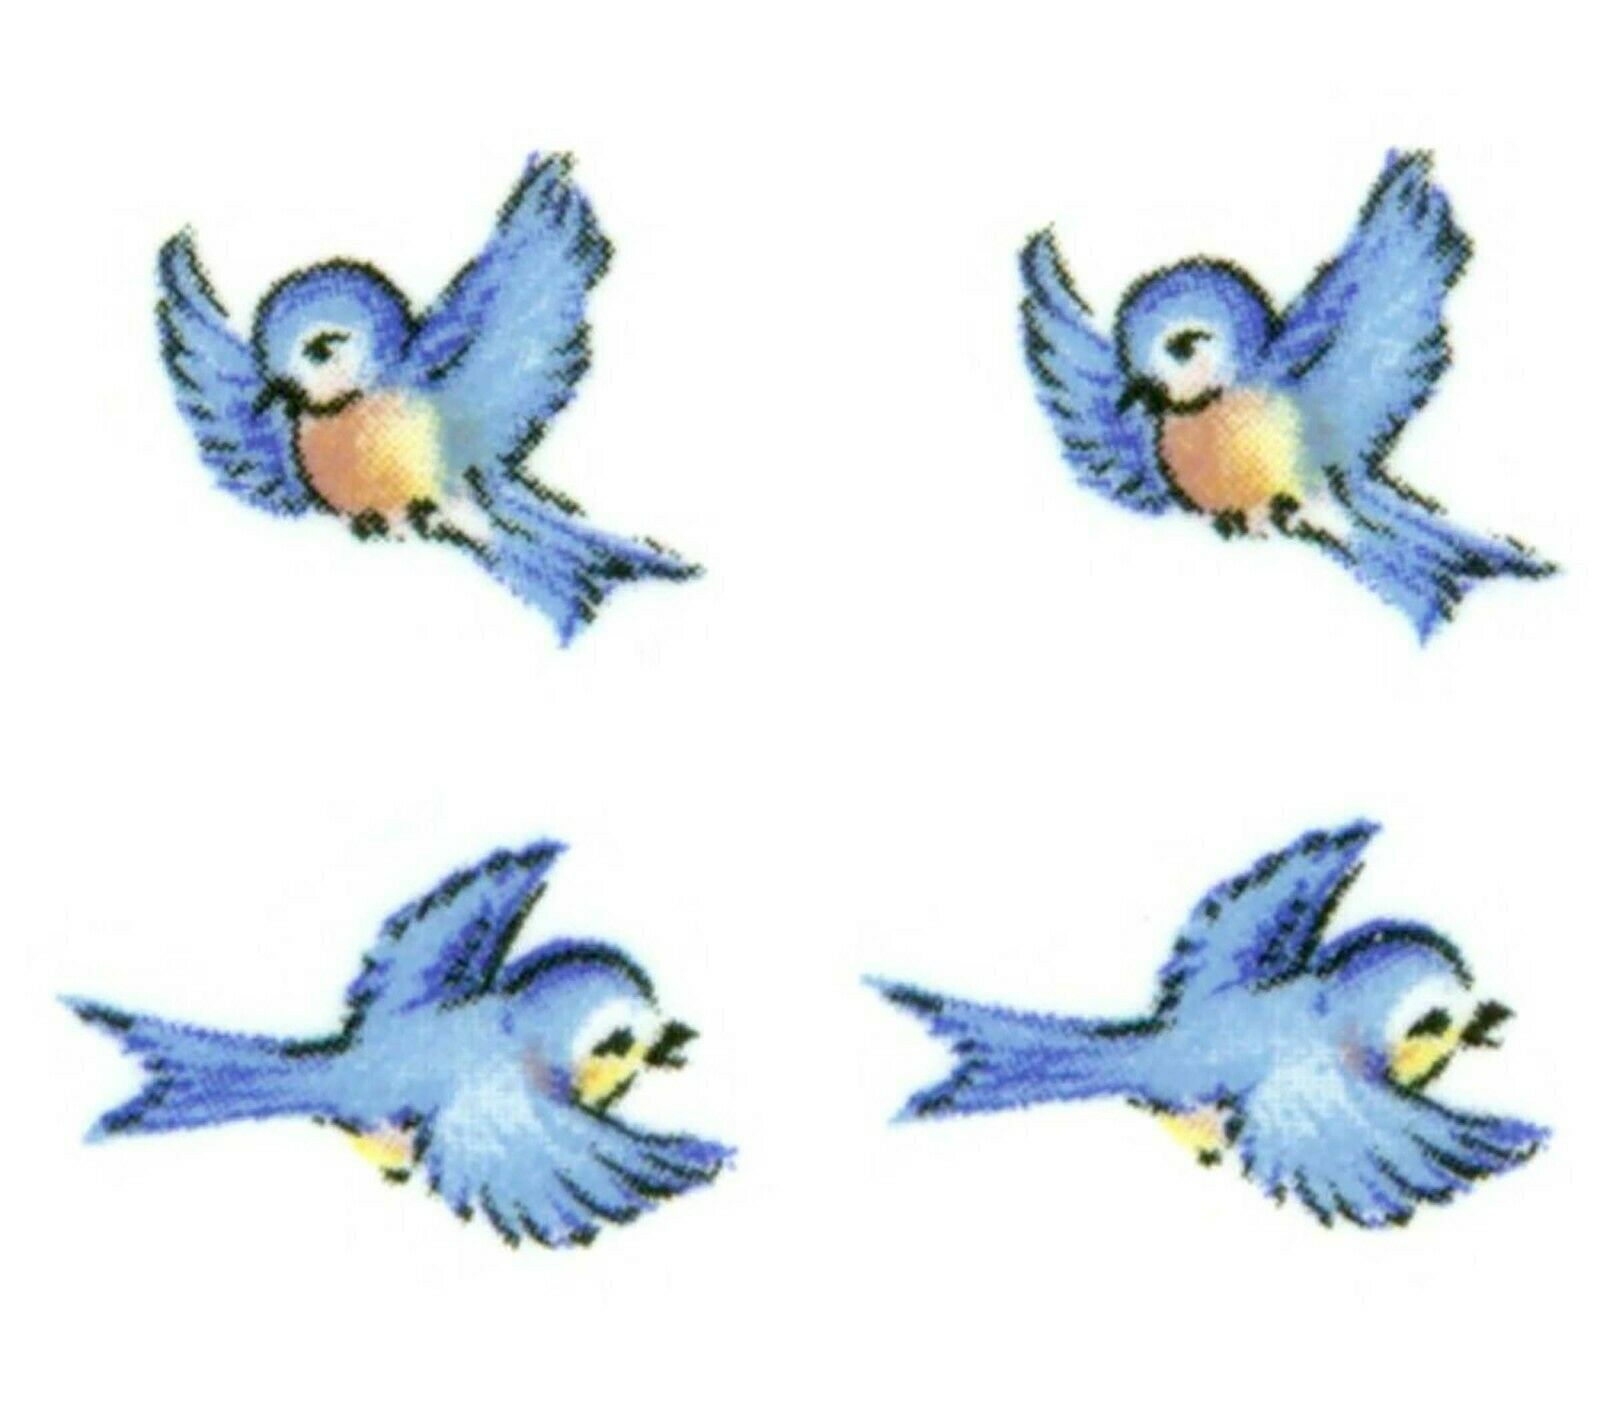 Tiny Blue Birds 12 Pcs 3/8" Or 1/2" Select-a-size Waterslide Ceramic Decals Ox